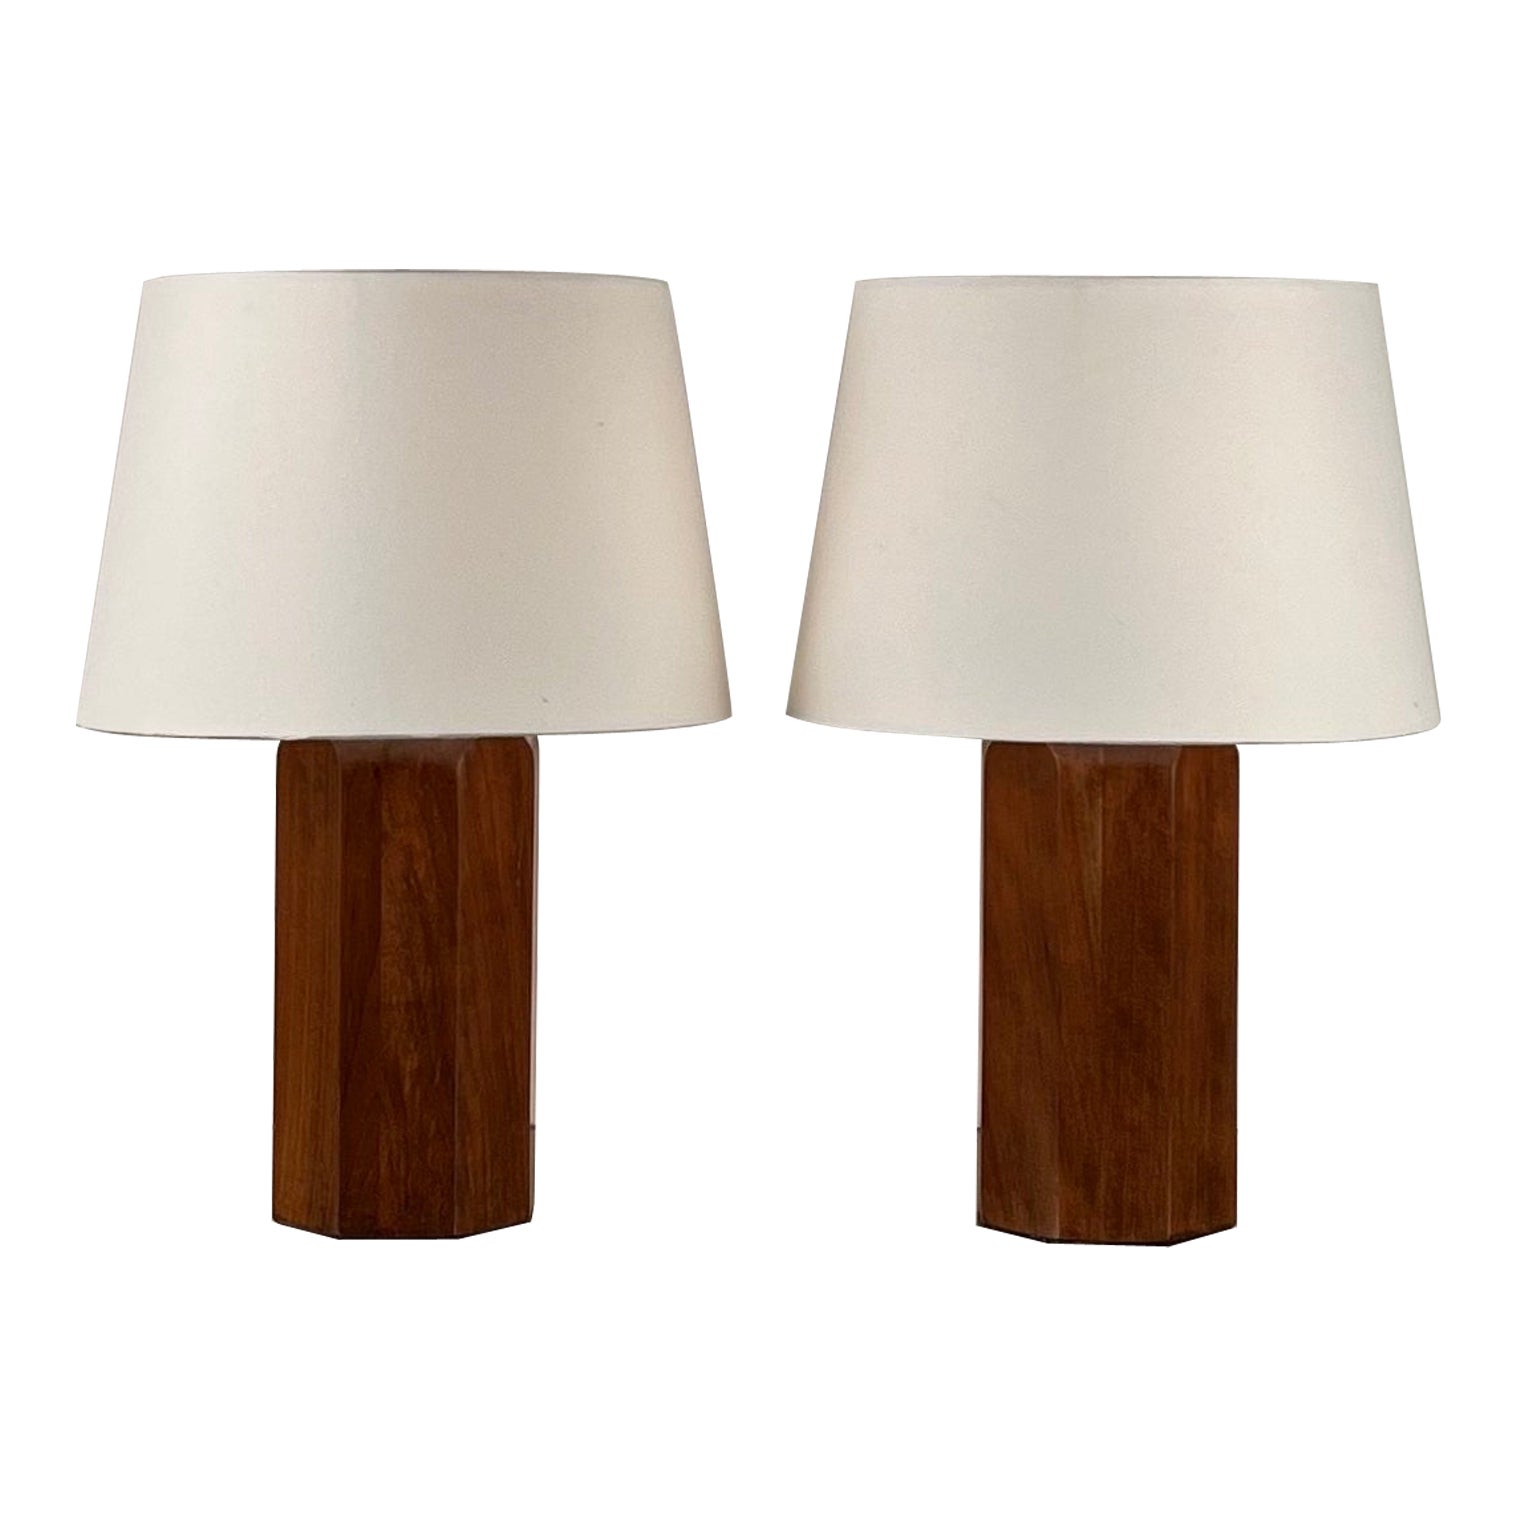 Pair of 'Octogone' Walnut Table Lamps with Parchment Shades by Design Frères For Sale